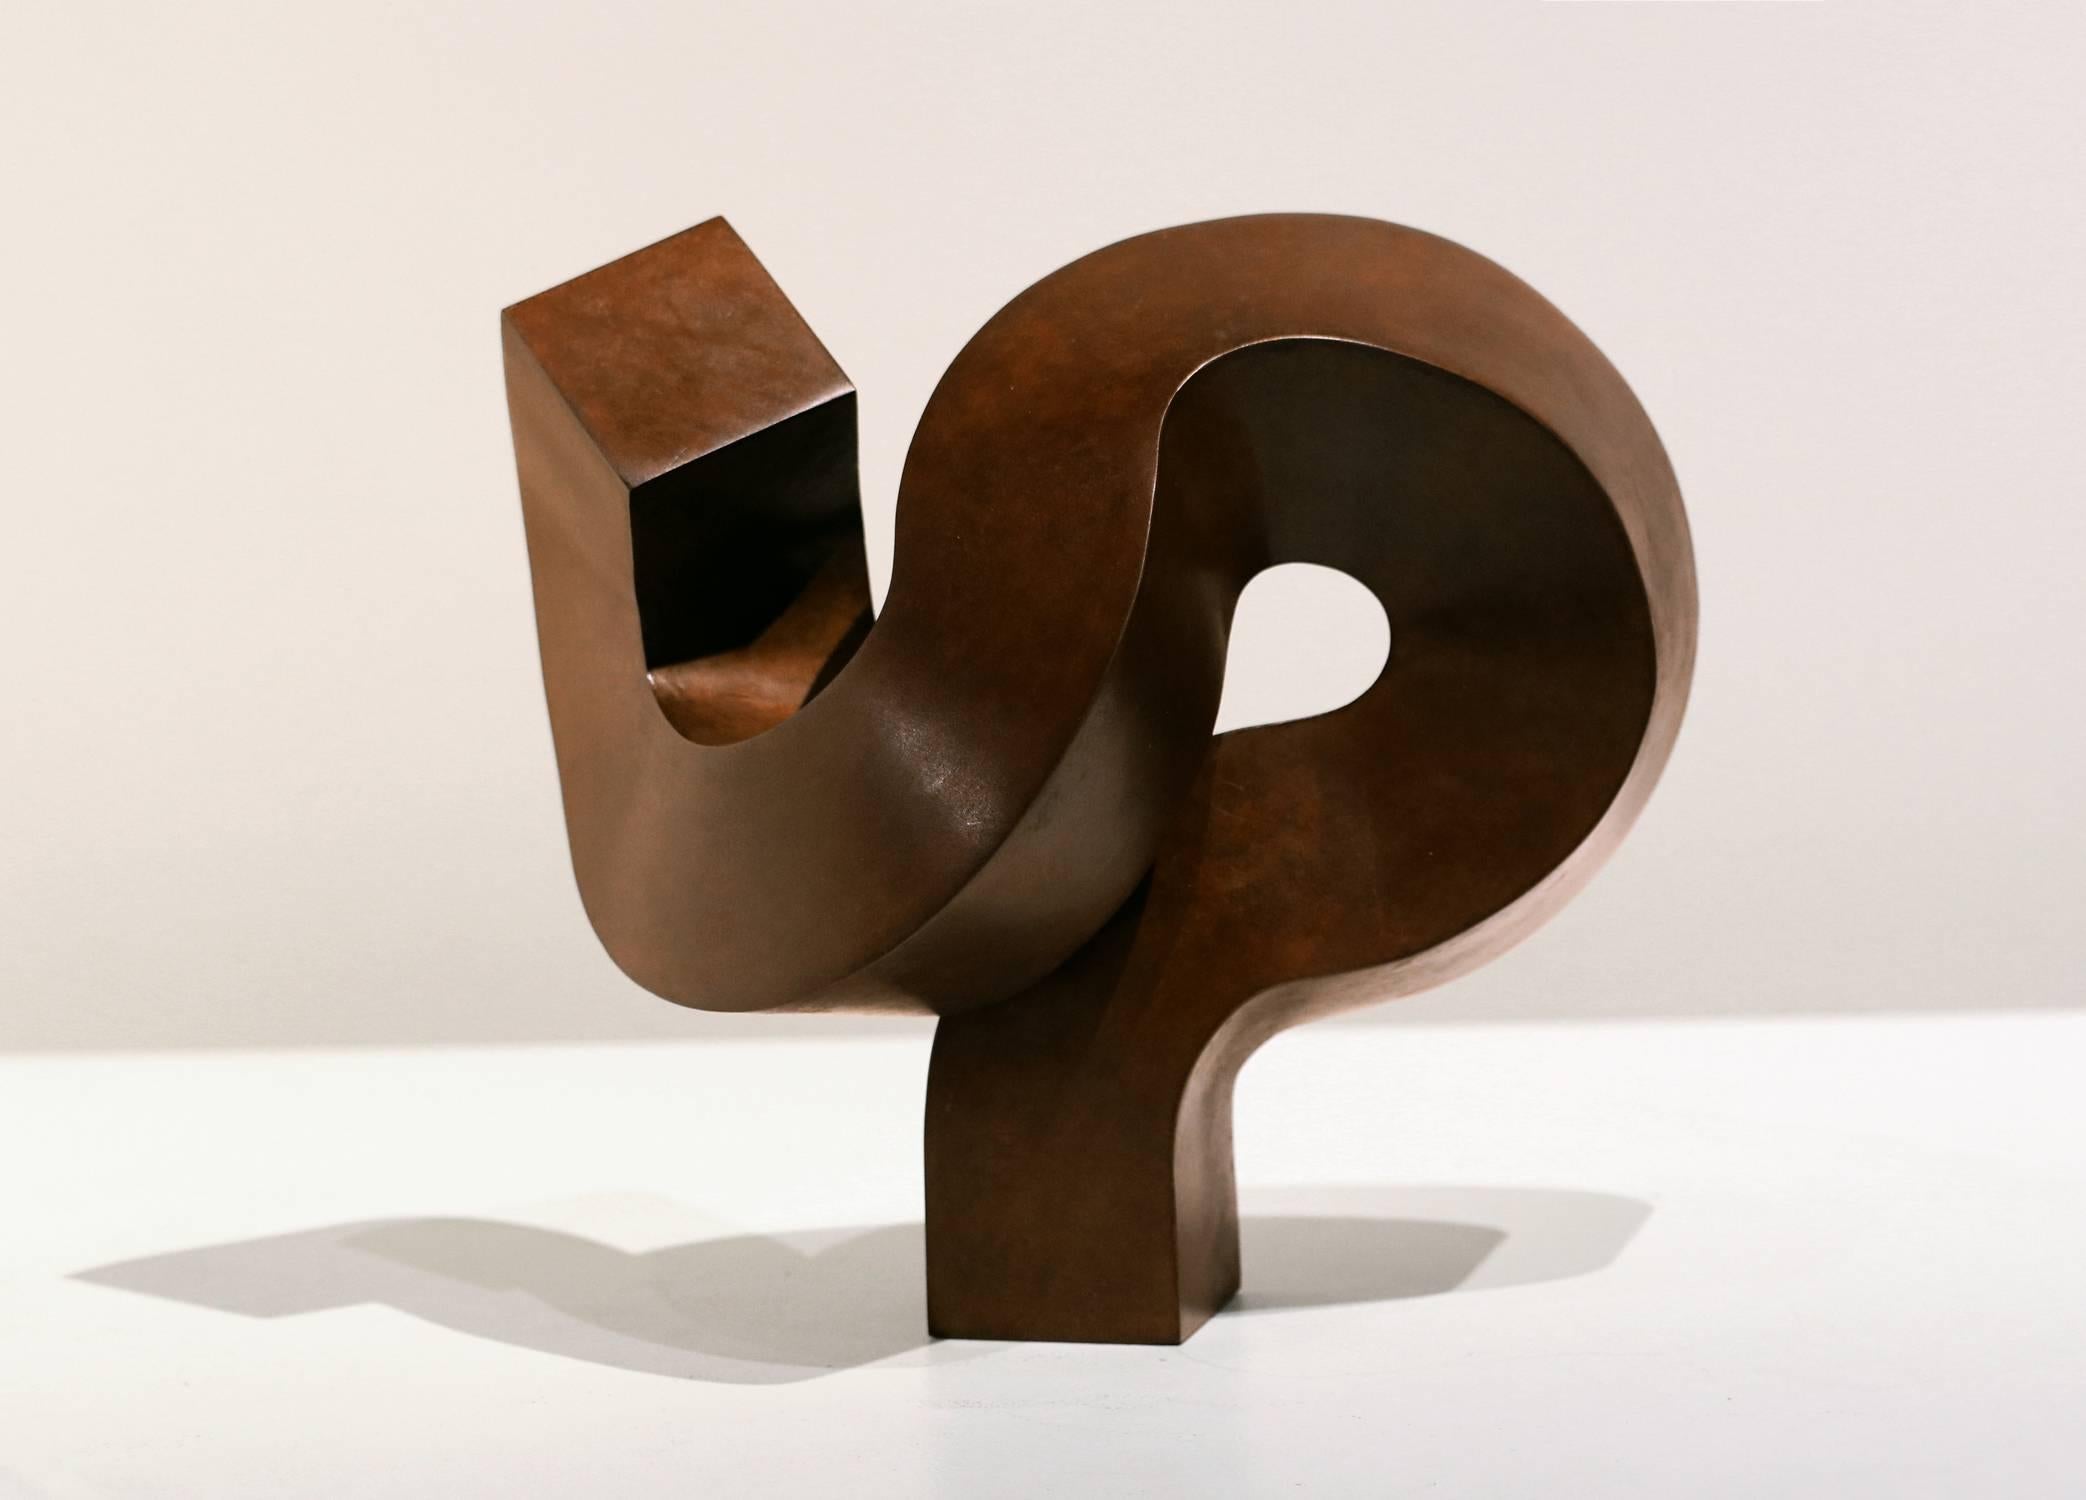 Clement Meadmore Abstract Sculpture - Delaunay's Dilemma